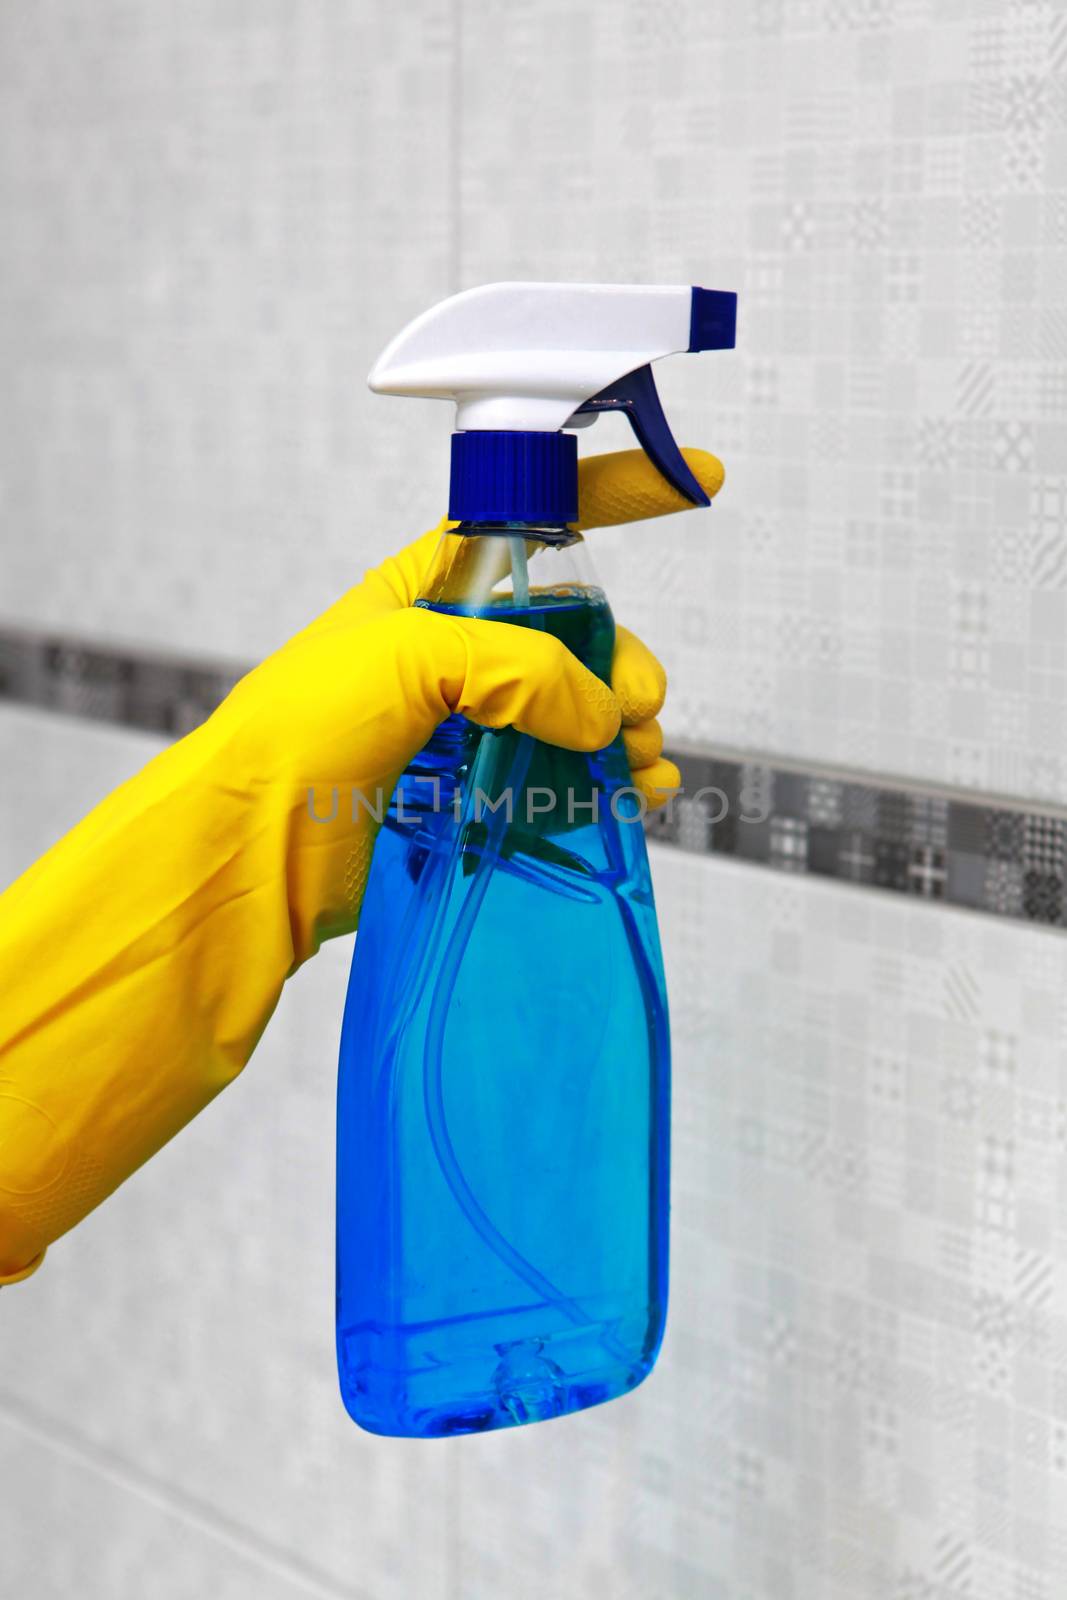 spray for cleaning in hand by ssuaphoto